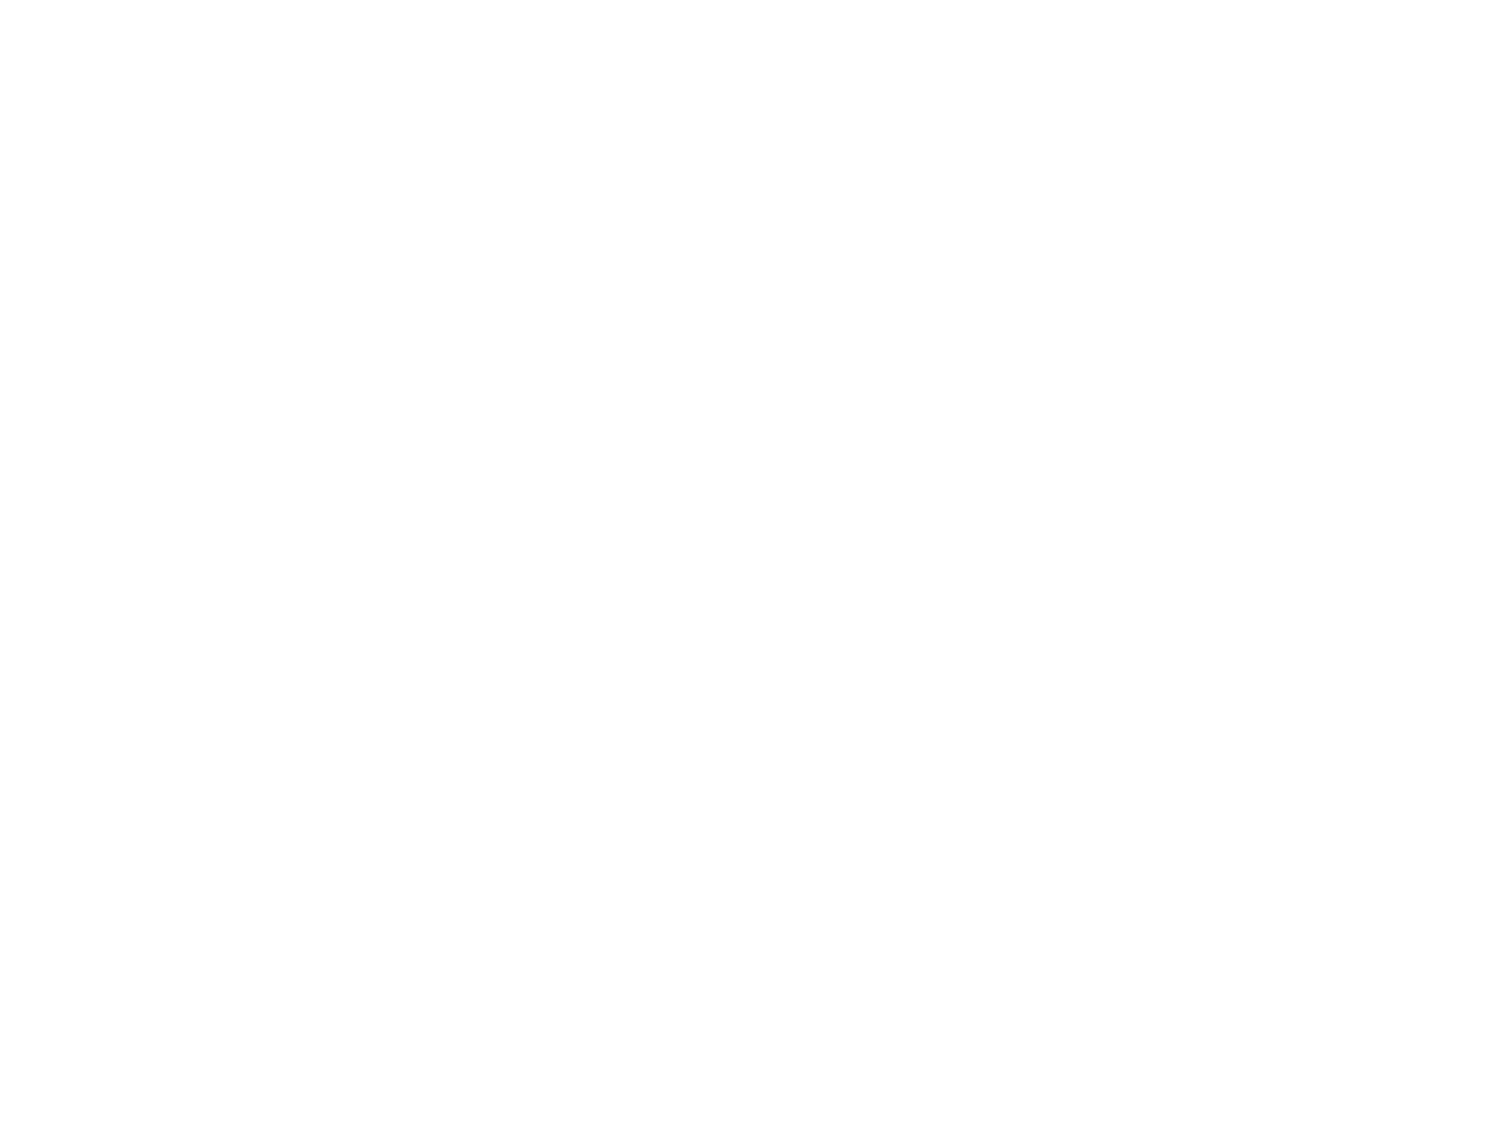 Will Smith Photography